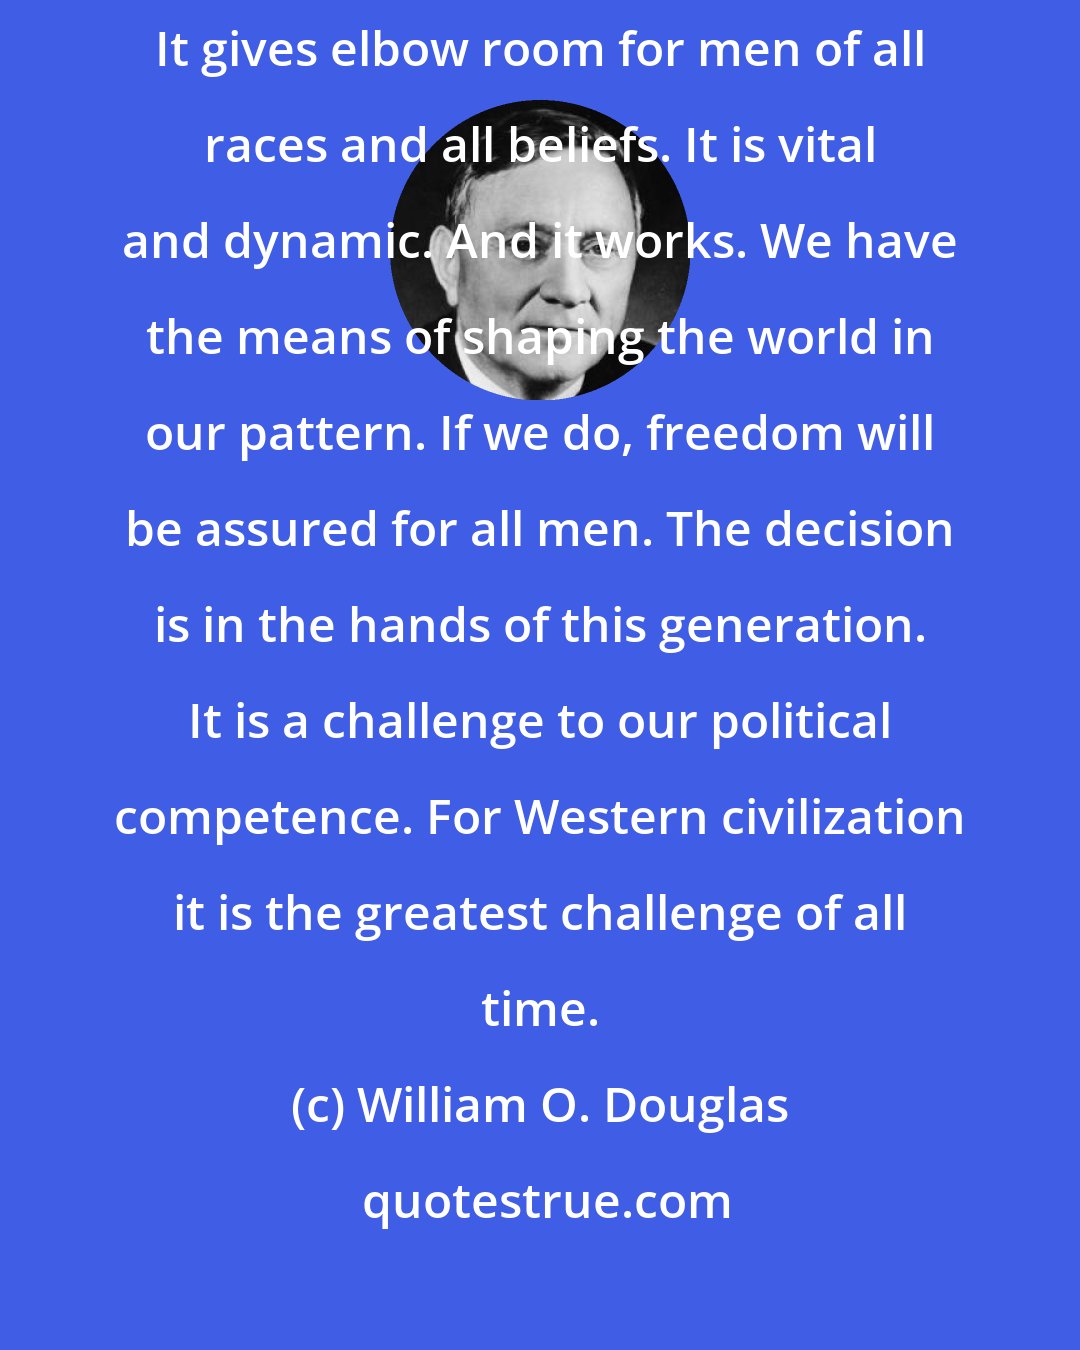 William O. Douglas: We have a system which, though far from perfect, is strong with idealism. It gives elbow room for men of all races and all beliefs. It is vital and dynamic. And it works. We have the means of shaping the world in our pattern. If we do, freedom will be assured for all men. The decision is in the hands of this generation. It is a challenge to our political competence. For Western civilization it is the greatest challenge of all time.